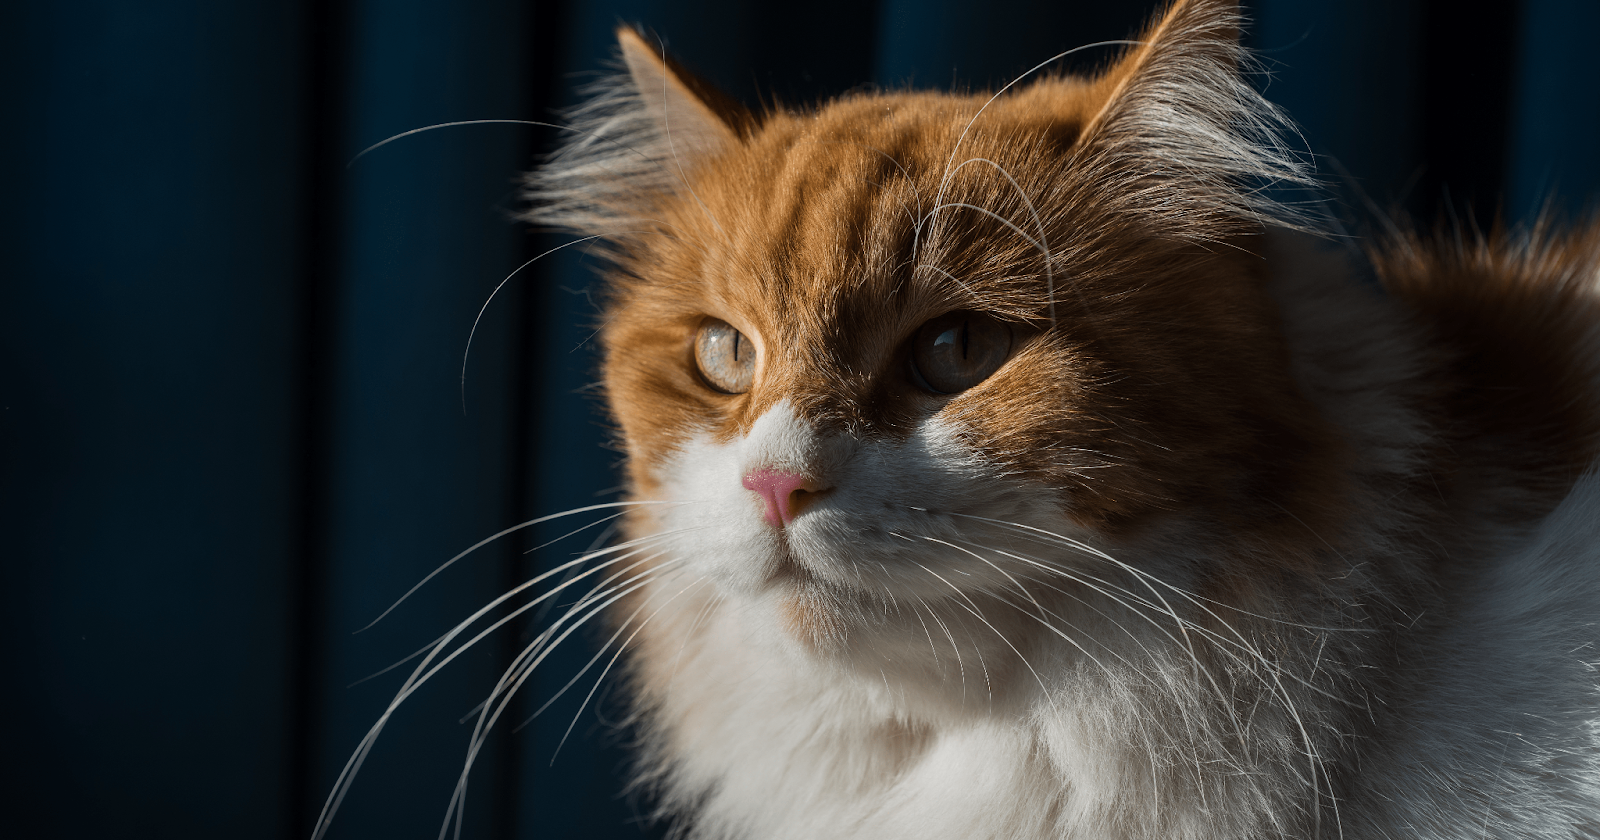 Fluffy orange and white cat gazing at window with blue background